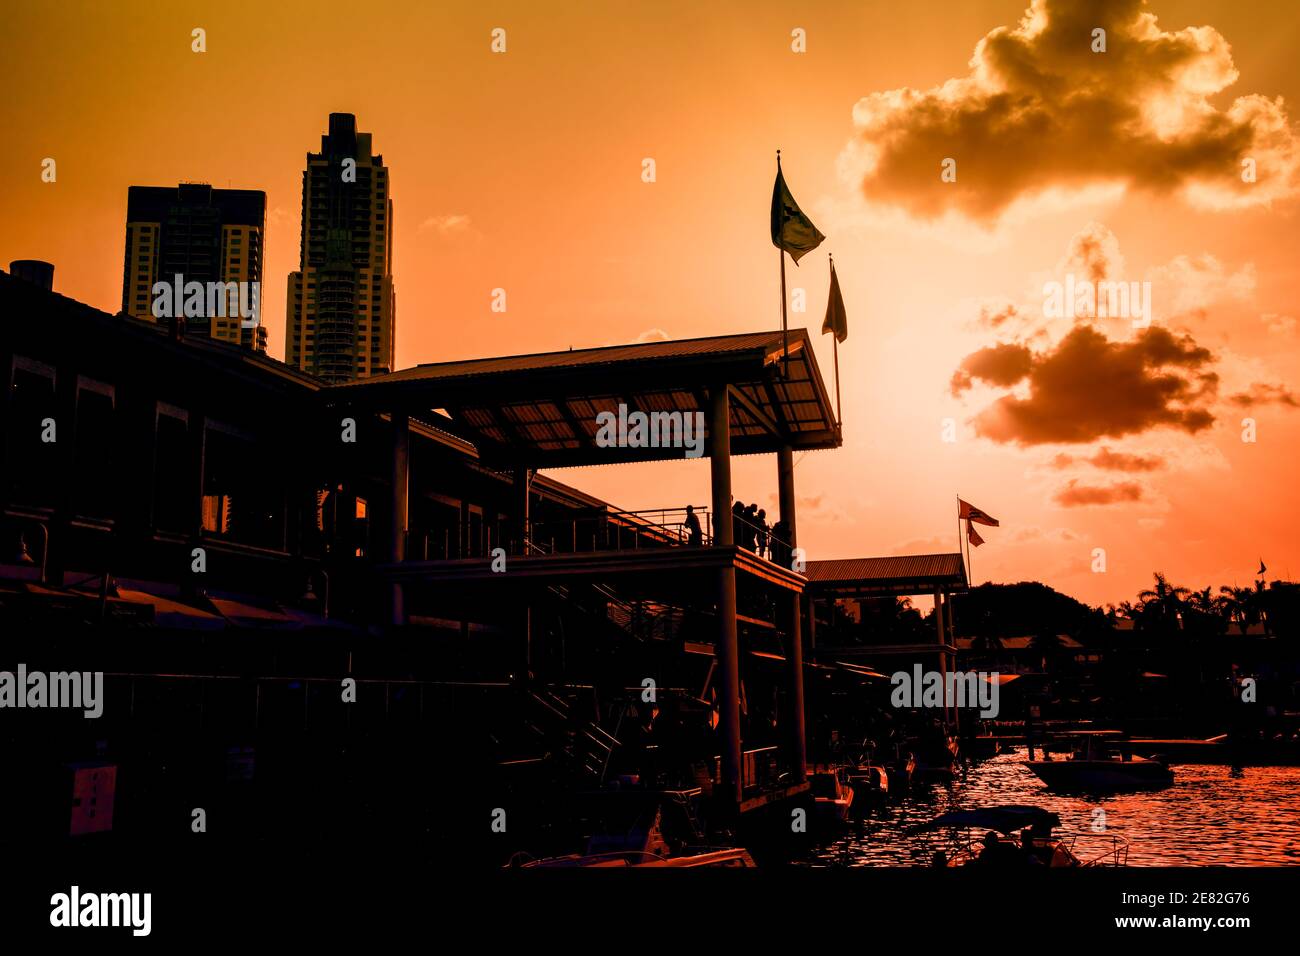 Bayfront Marketplace silhouetted at sunset on Biscayne Bay in Miami, Florida. Stock Photo